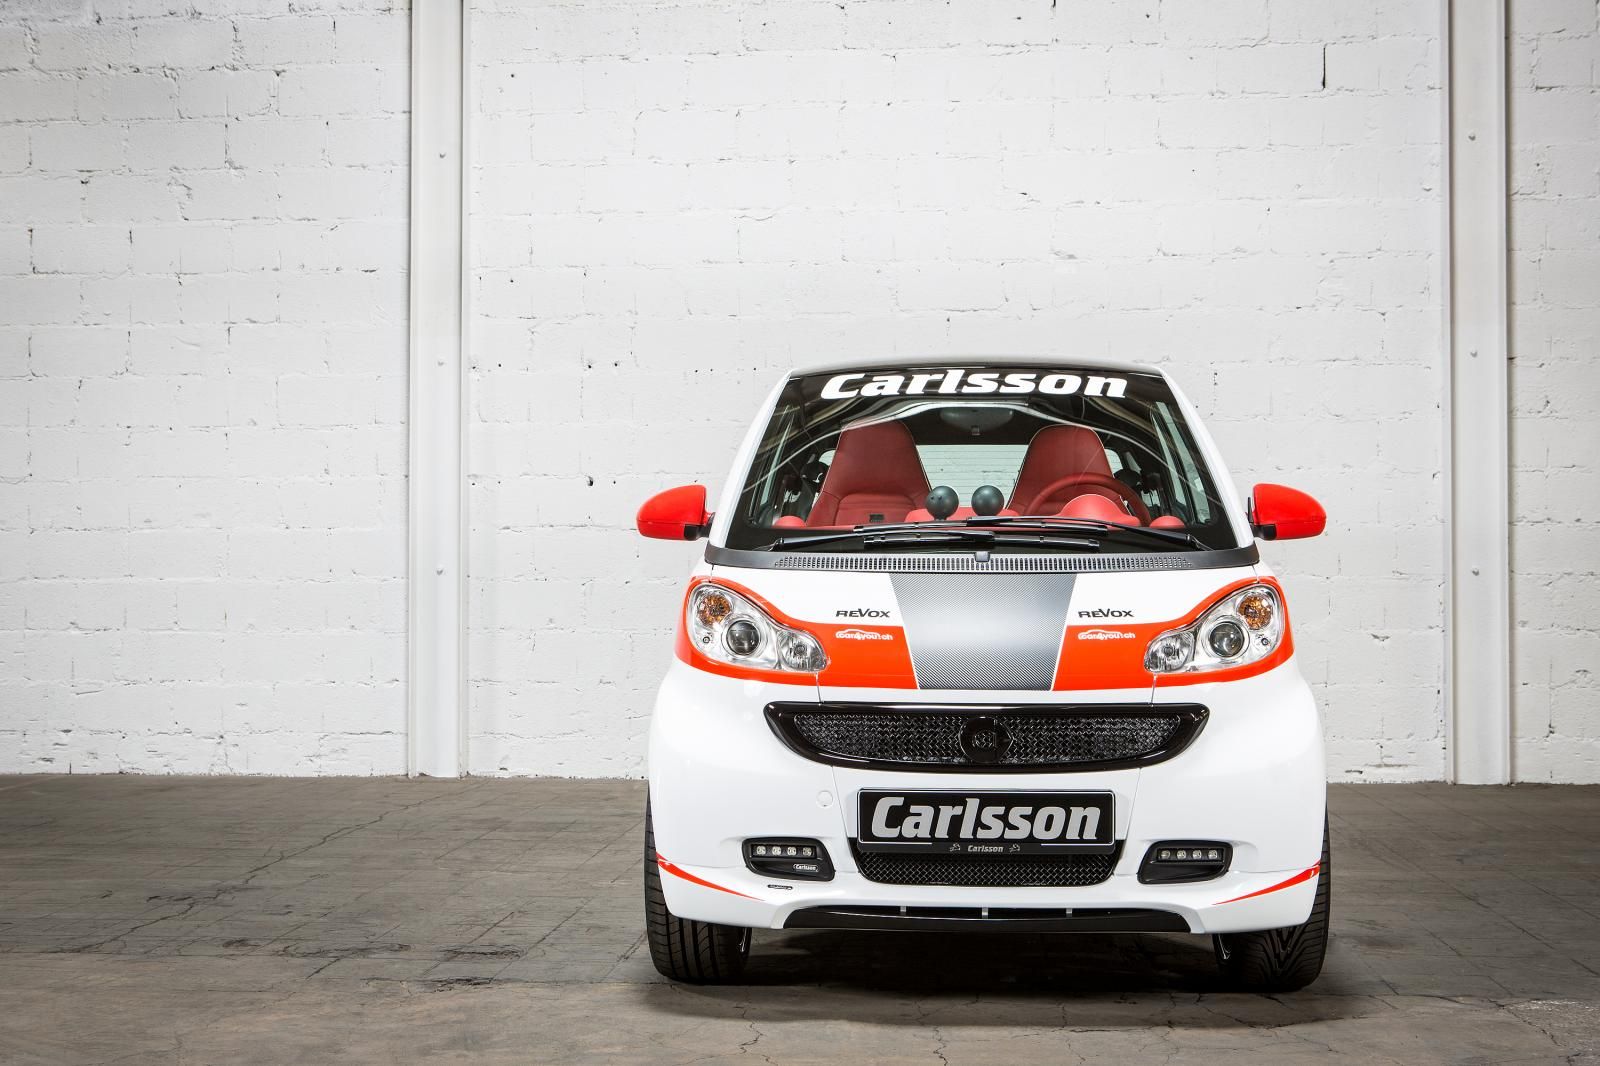 2013 Smart ForTwo Race Edition by Carlsson